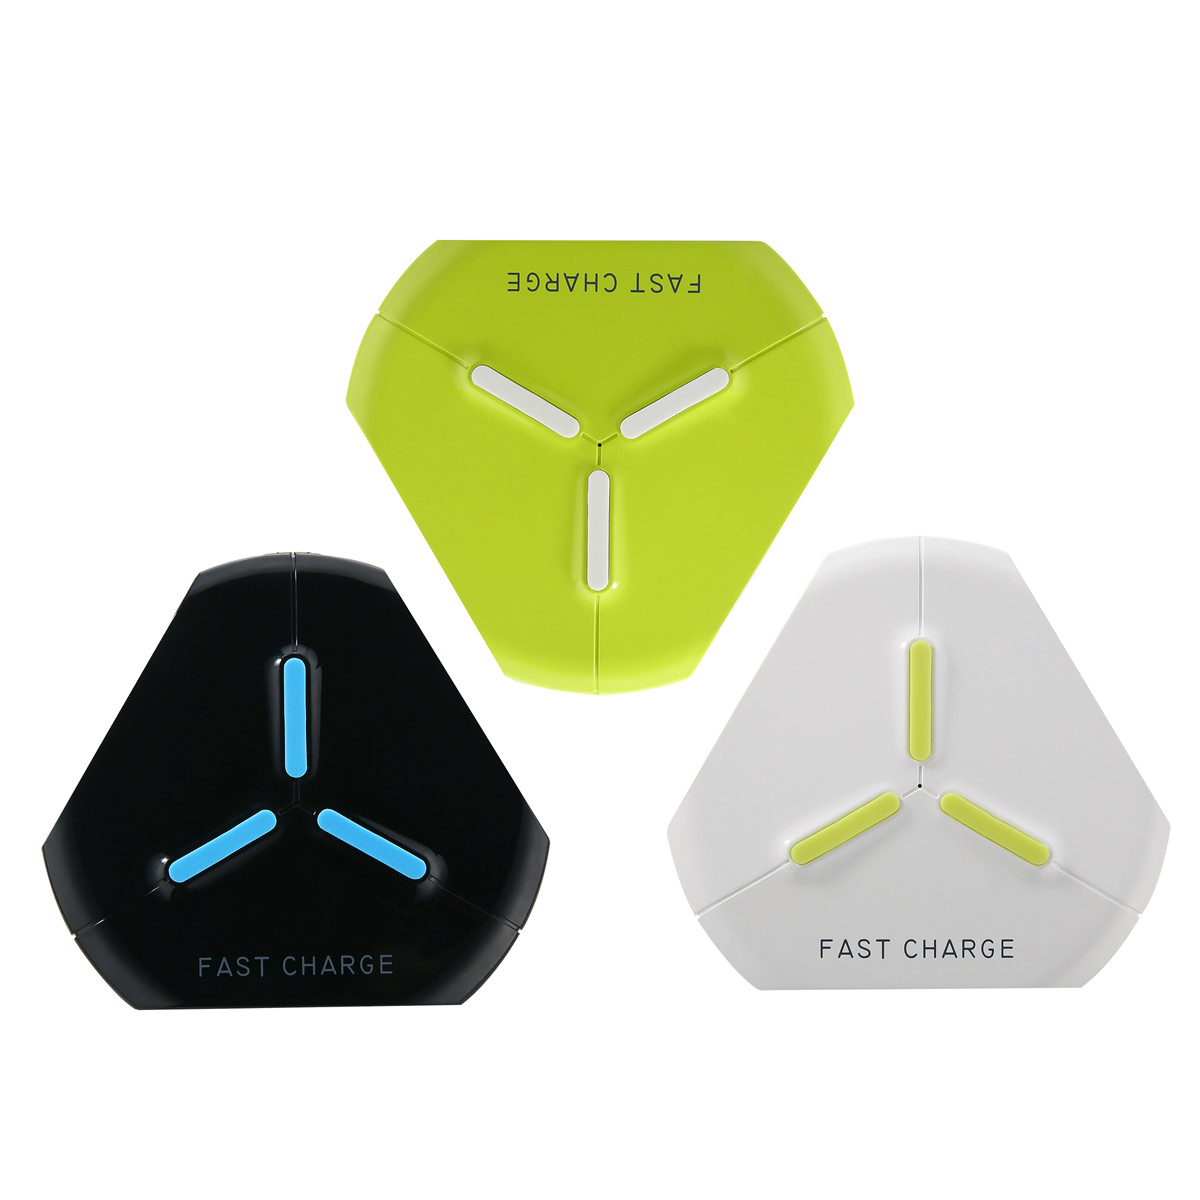 Q500-Qi-Wireless-Fast-Charging-Phone-Charger-Pad-with-LED-Indicator-for-Samsung-S8-iPhone-8-X-1207492-1